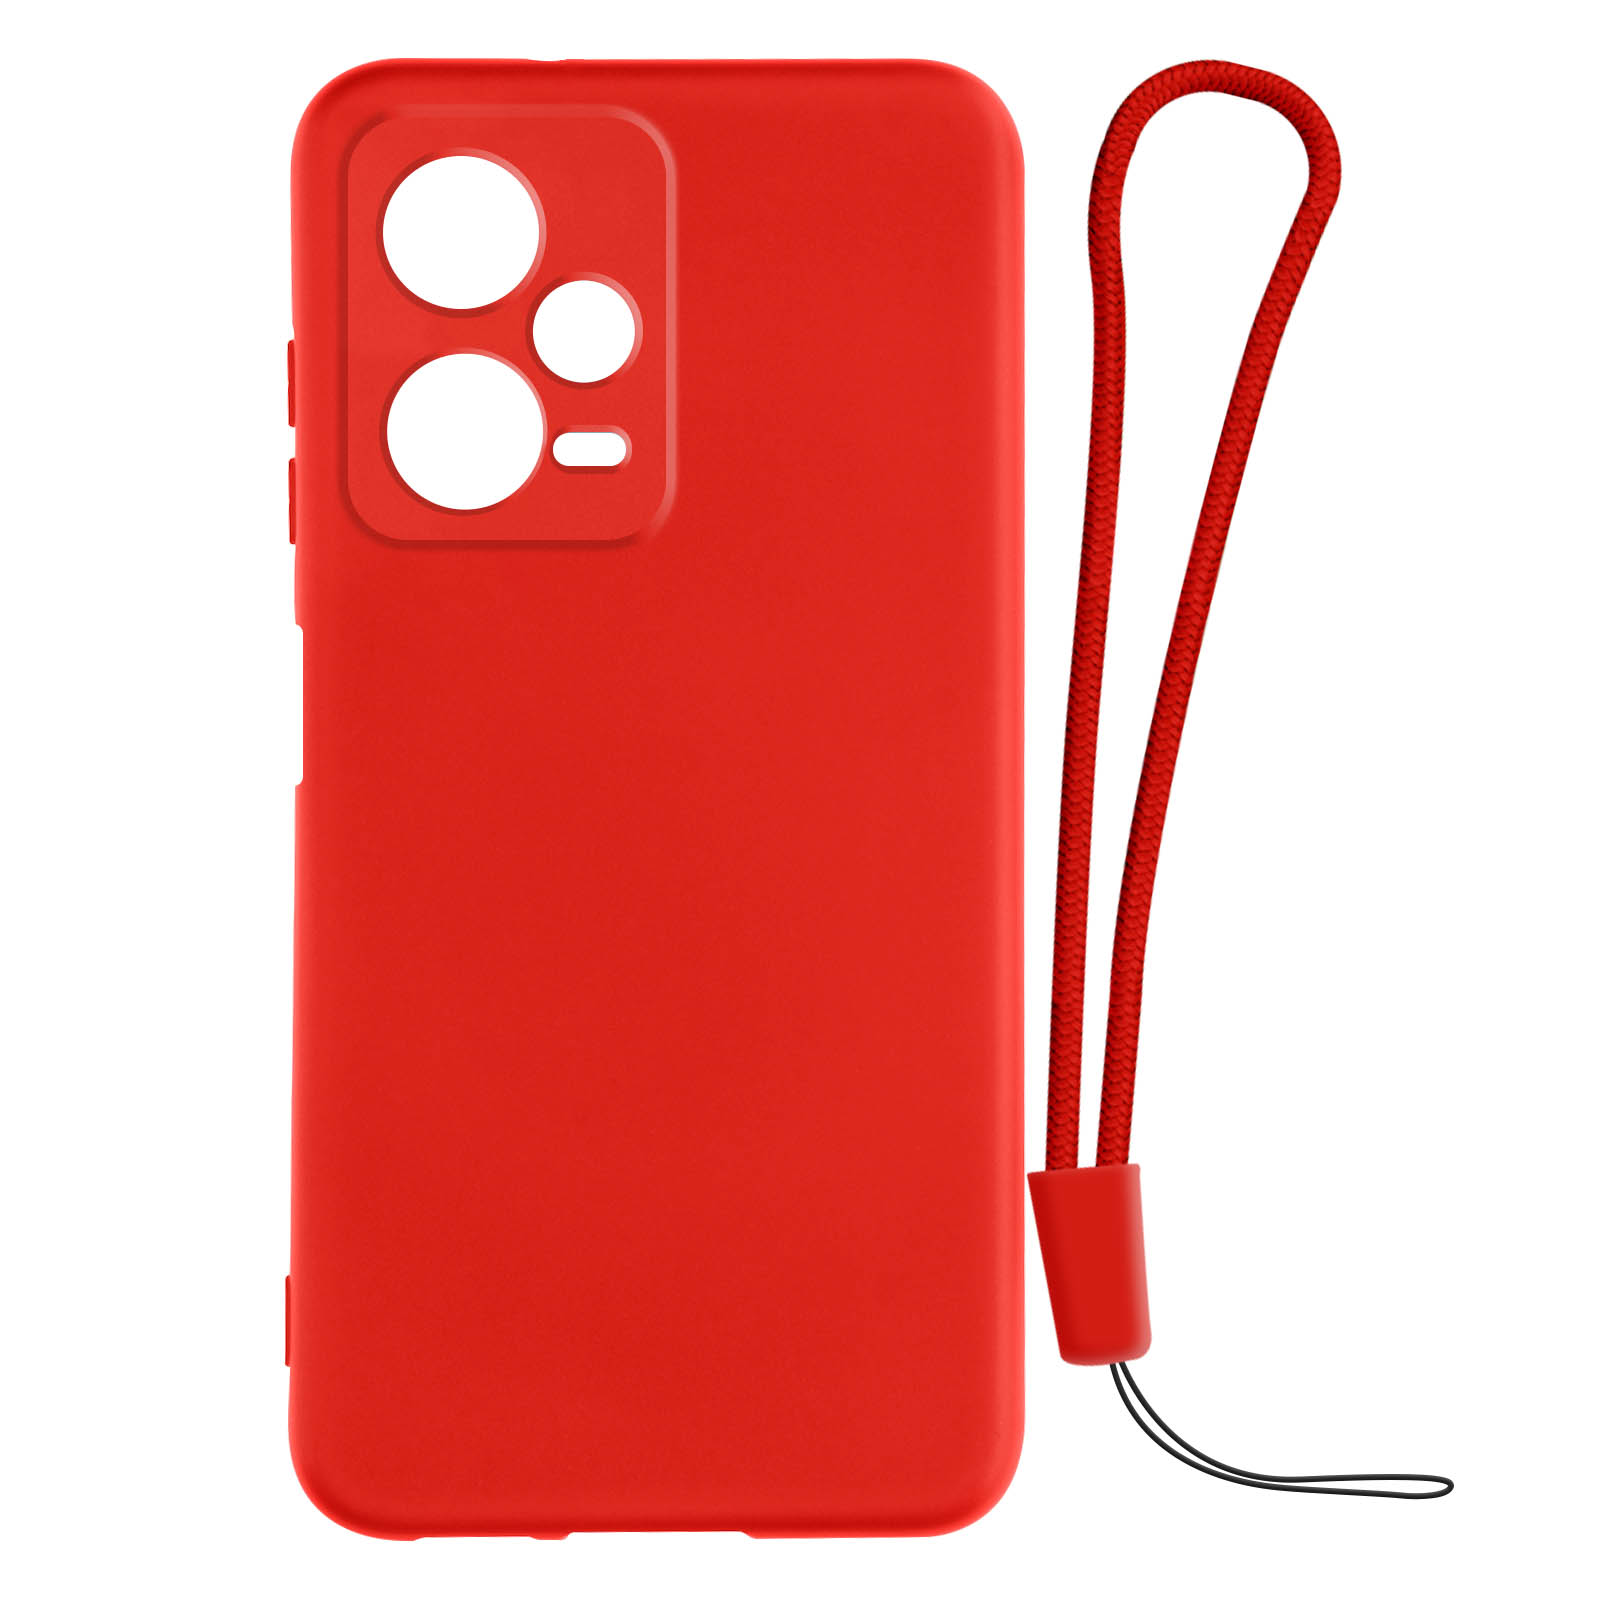 Pro Backcover, 12 Series, Redmi Likid Xiaomi, Note 5G, Rot AVIZAR